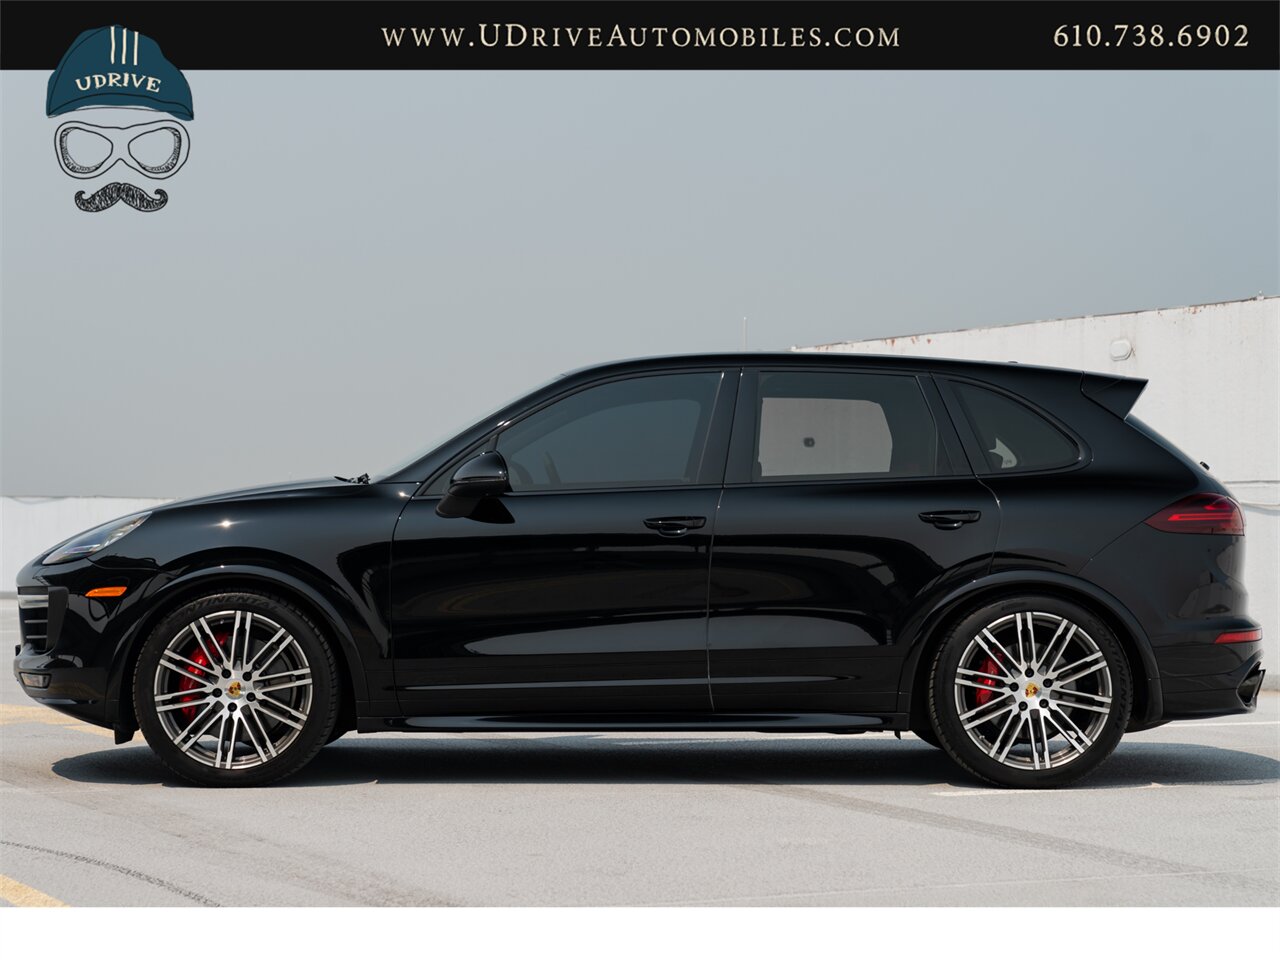 2016 Porsche Cayenne GTS  CPO Warranty 21in Whls Sport Chrono Red Dial Alcantara Red Belts Pano - Photo 10 - West Chester, PA 19382